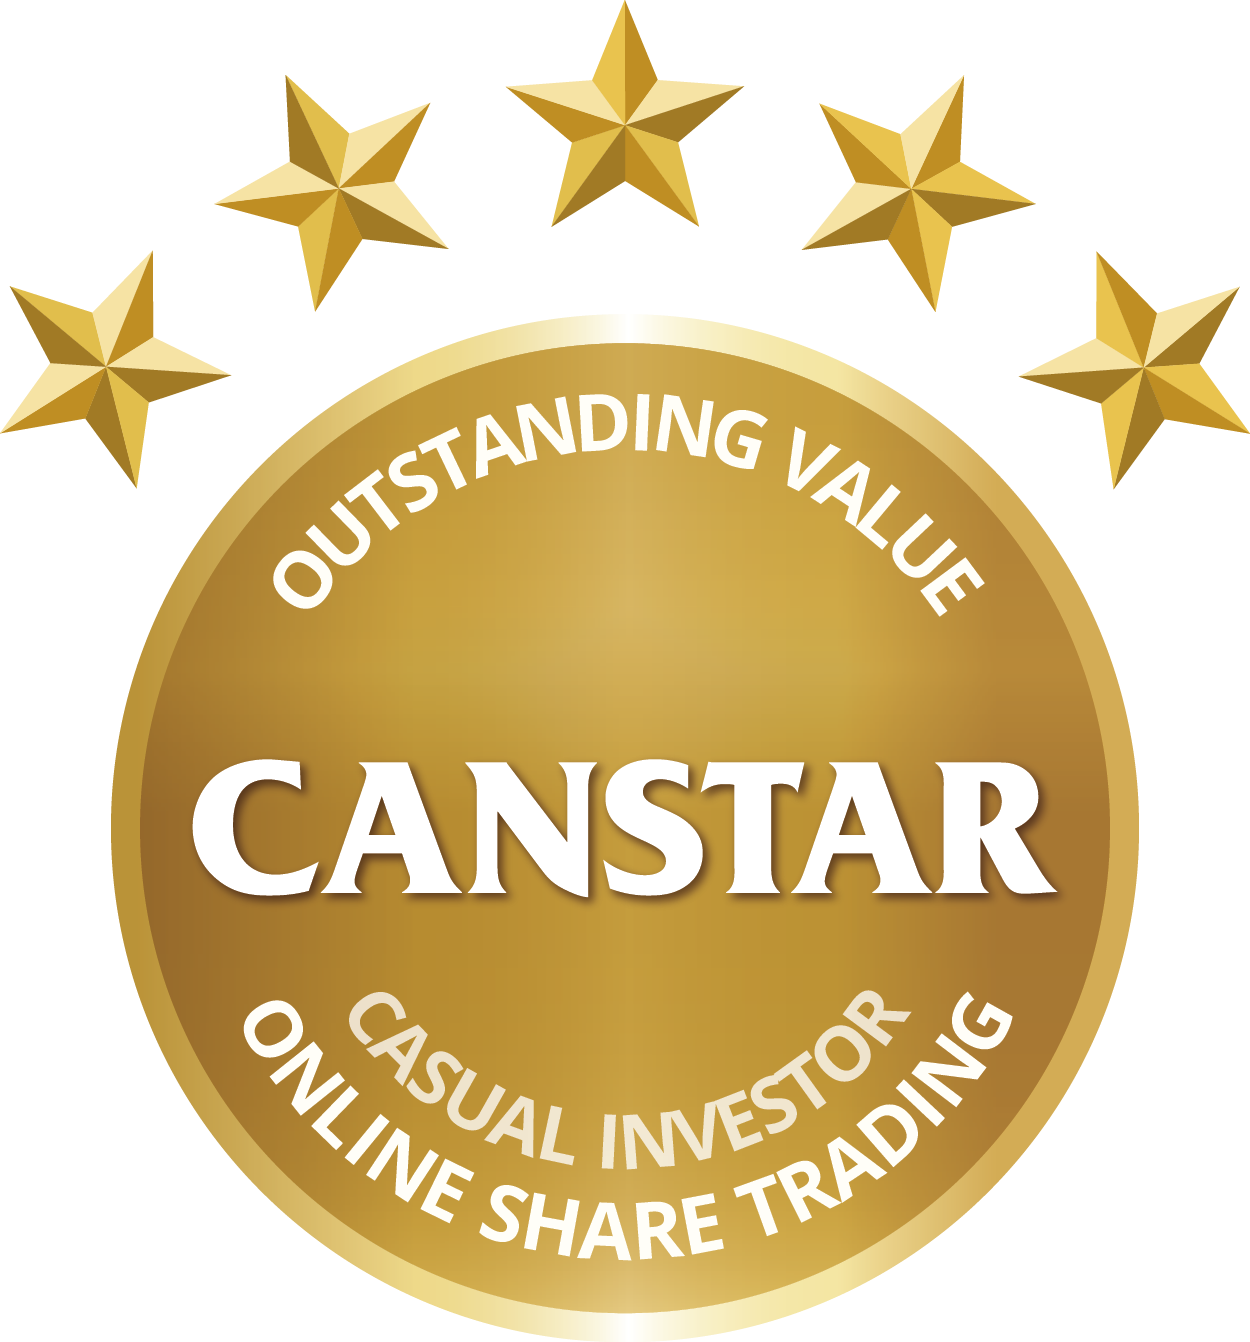 CANSTAR Outstanding Value Online Share Trading Casual Investor